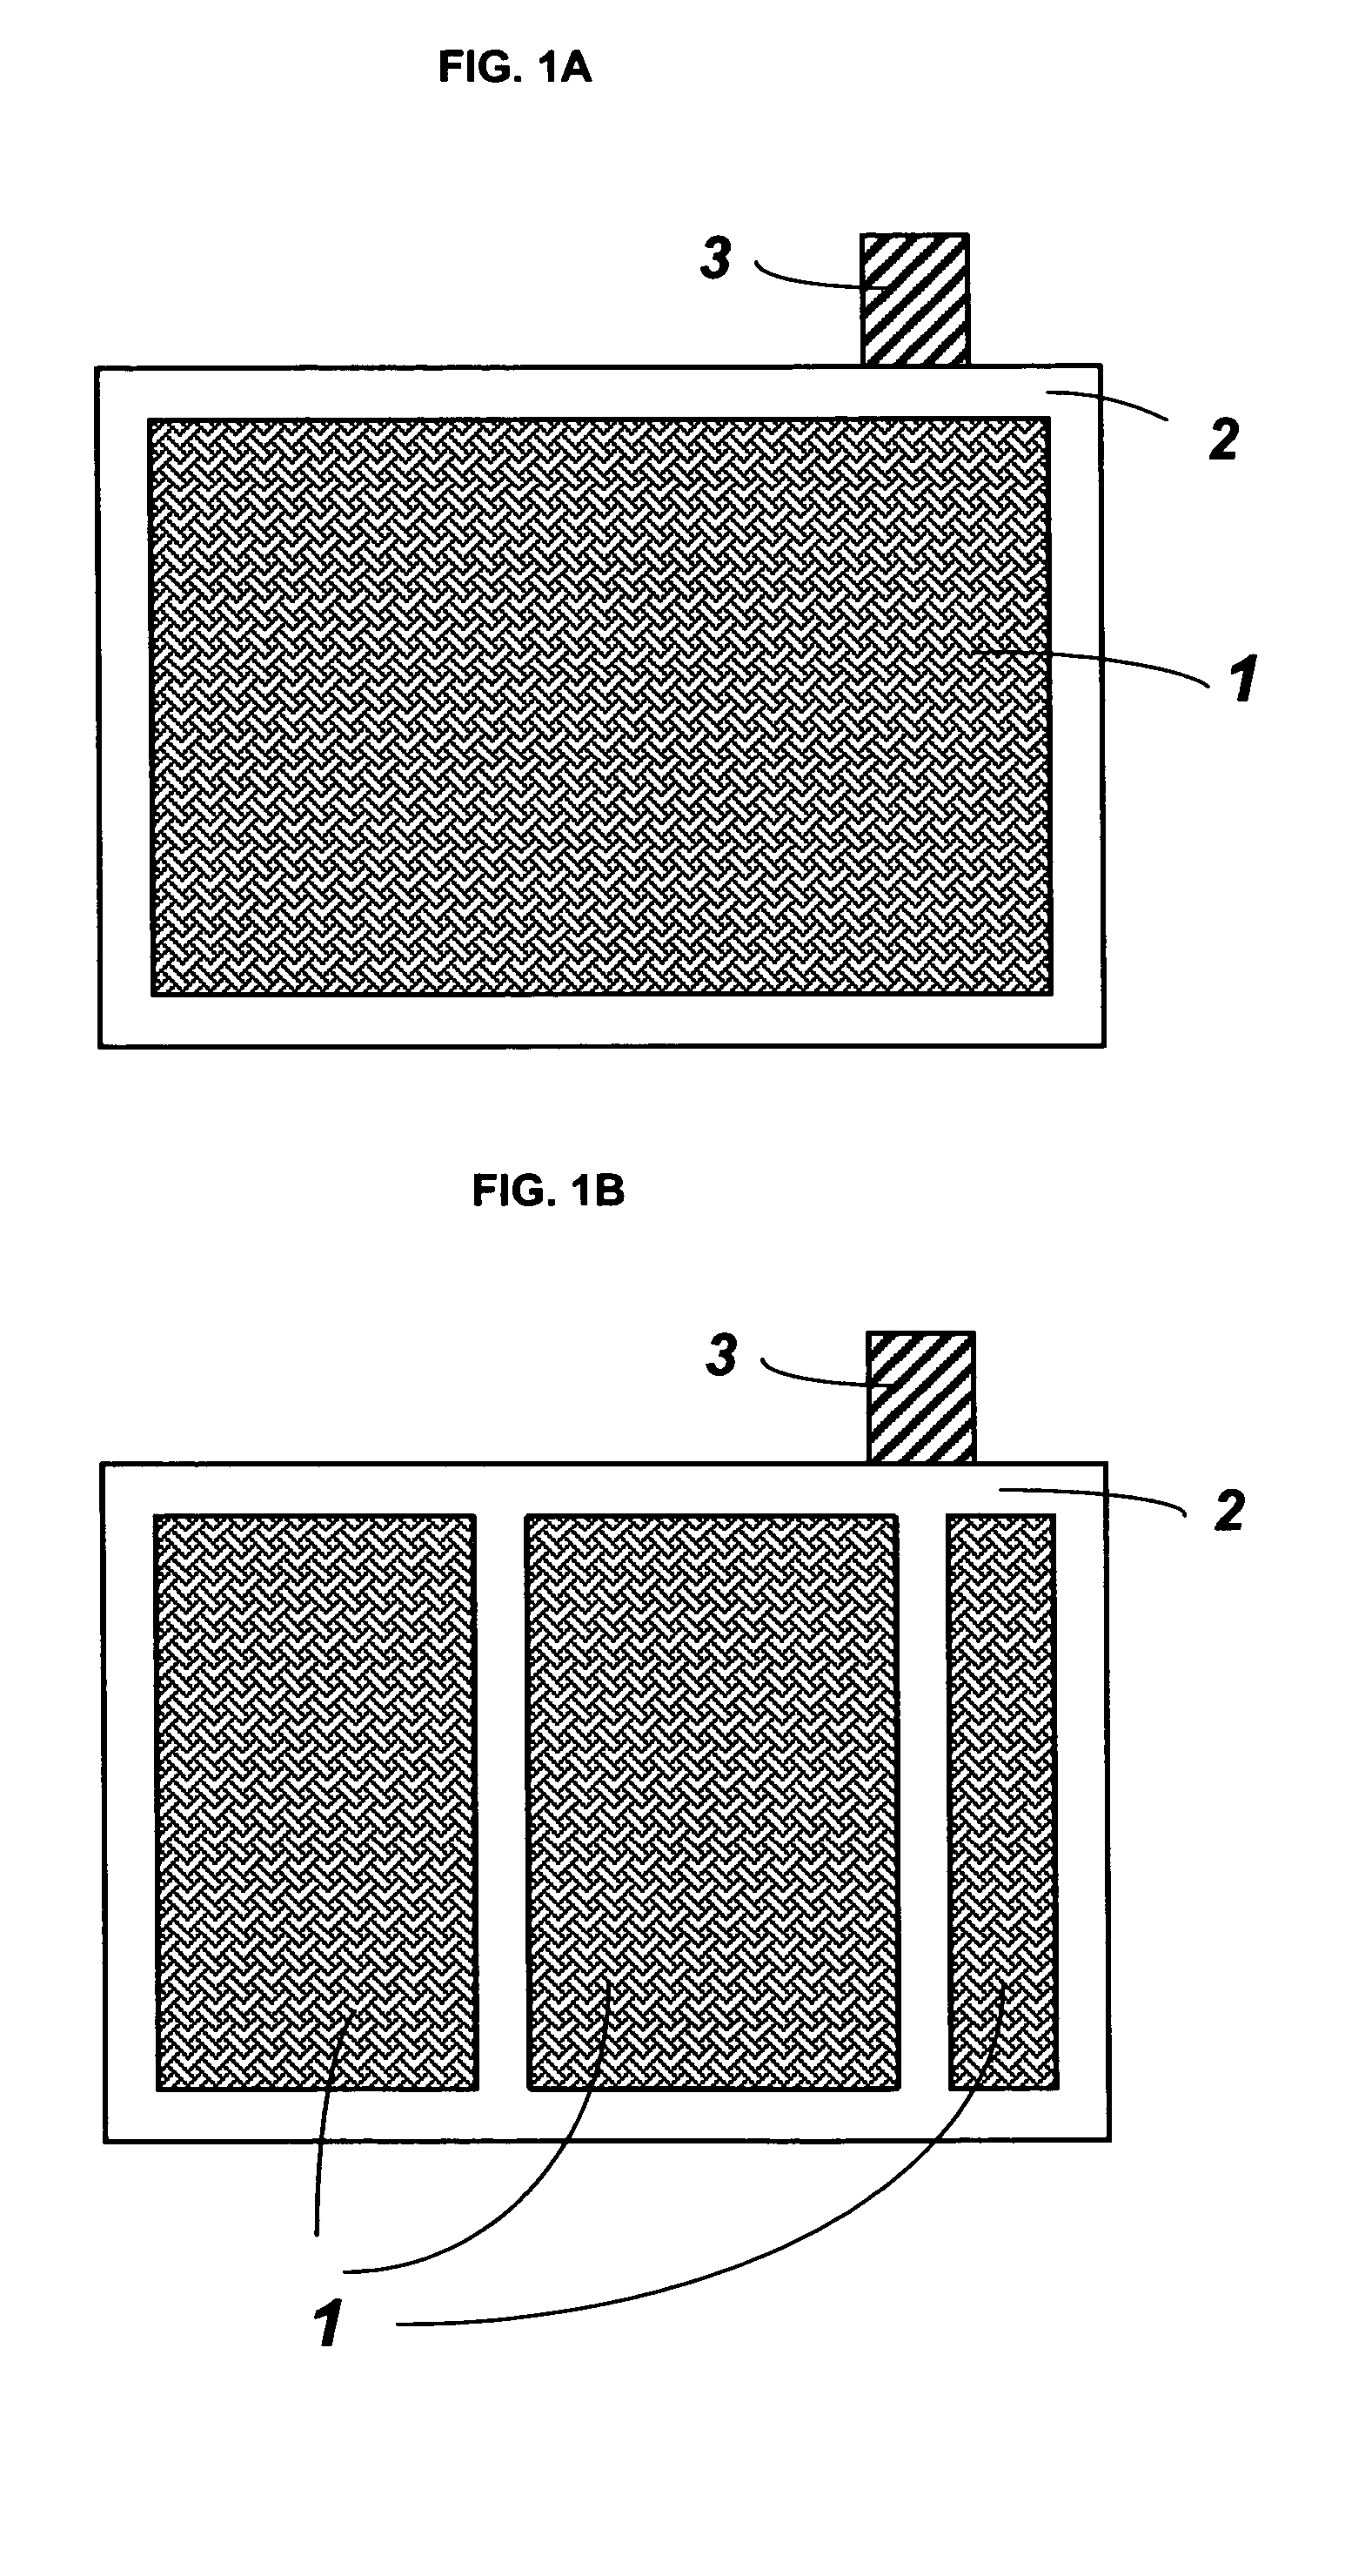 Current collector structure and methods to improve the performance of a lead-acid battery